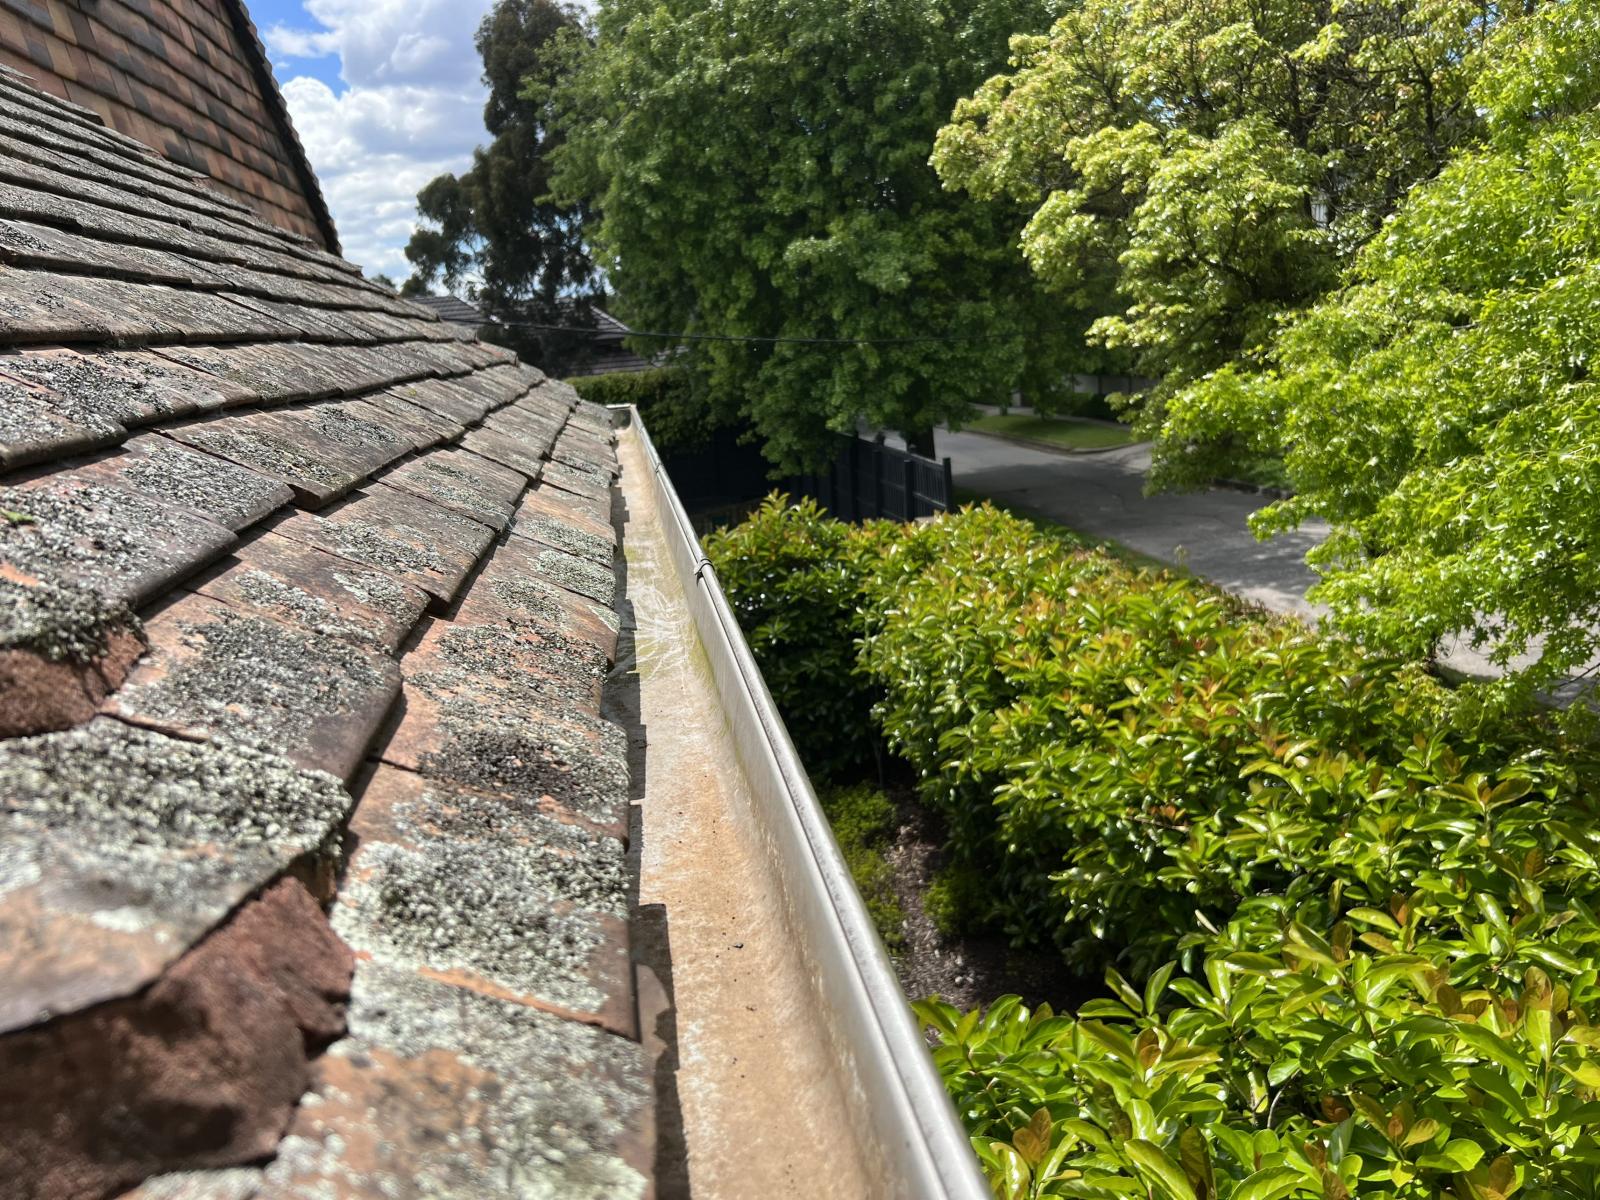 Gutter Cleaning on an old terracotta shingle roof